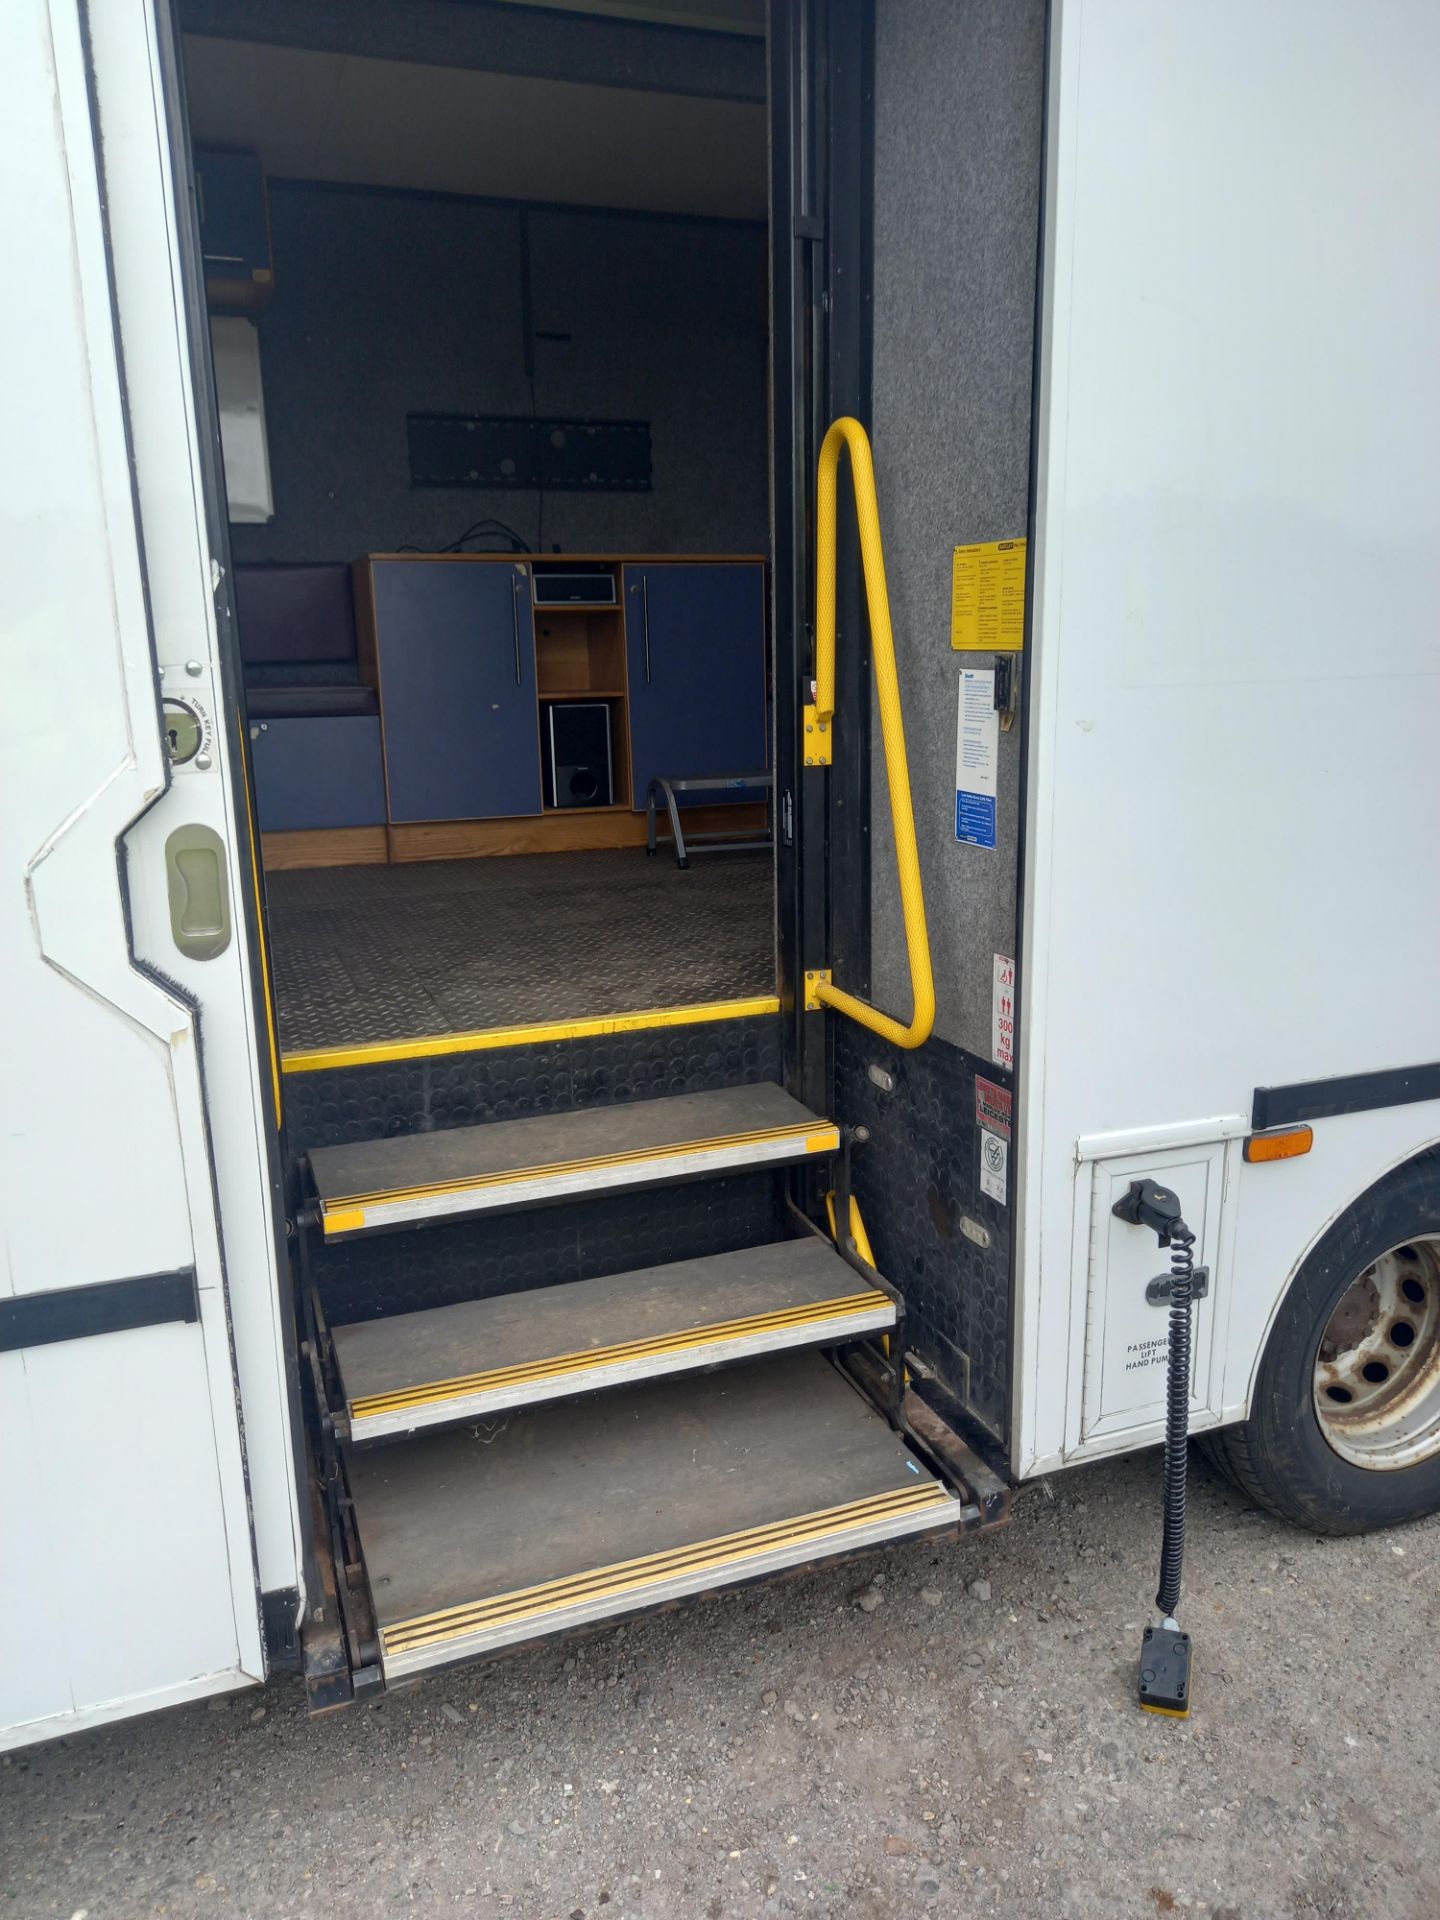 Community Outreach Vehicle/Camper Van Conversion. - Image 14 of 30